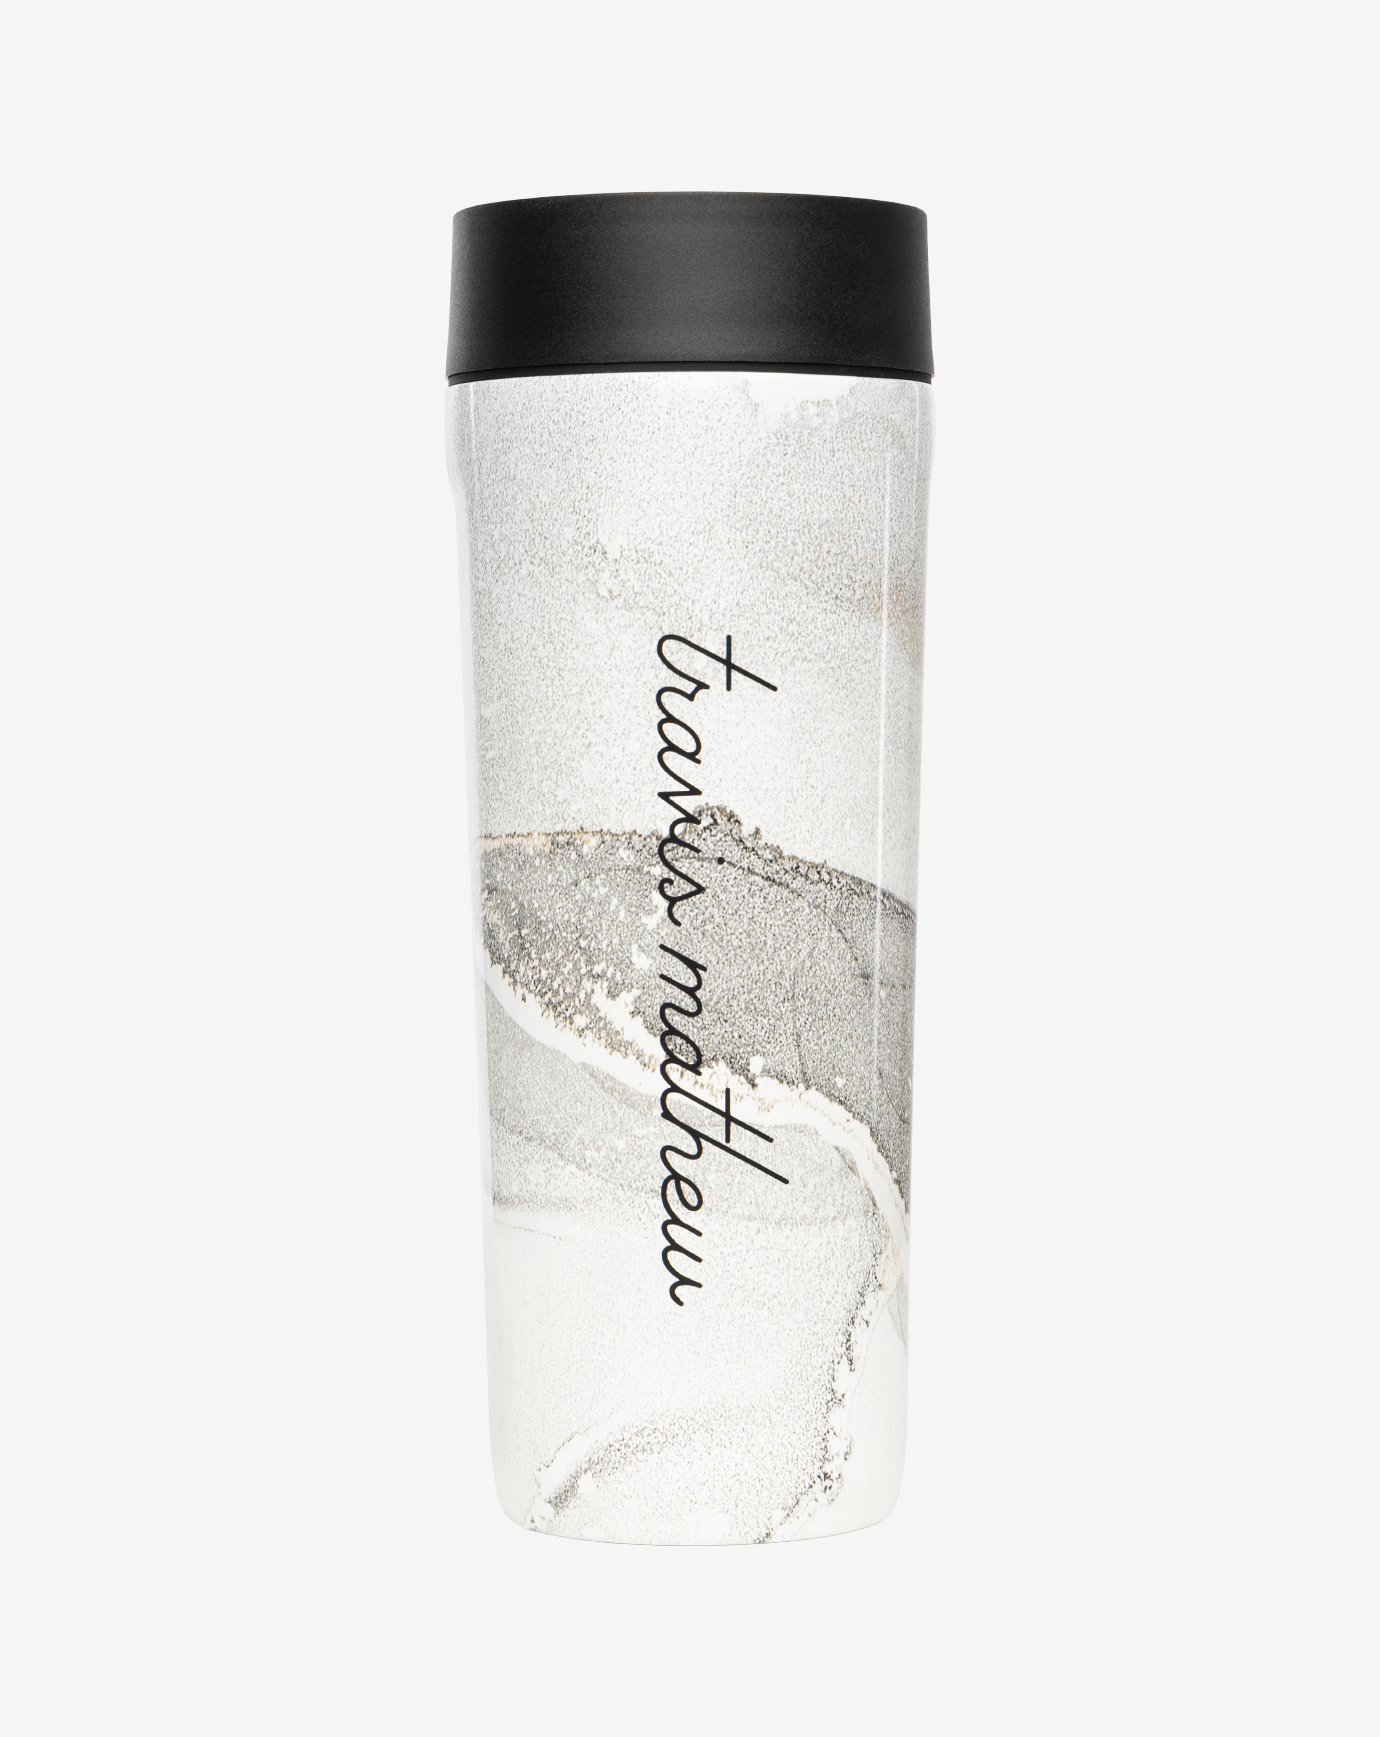 Have the Day you Deserve colorful tumbler, 40 oz metal tumbler